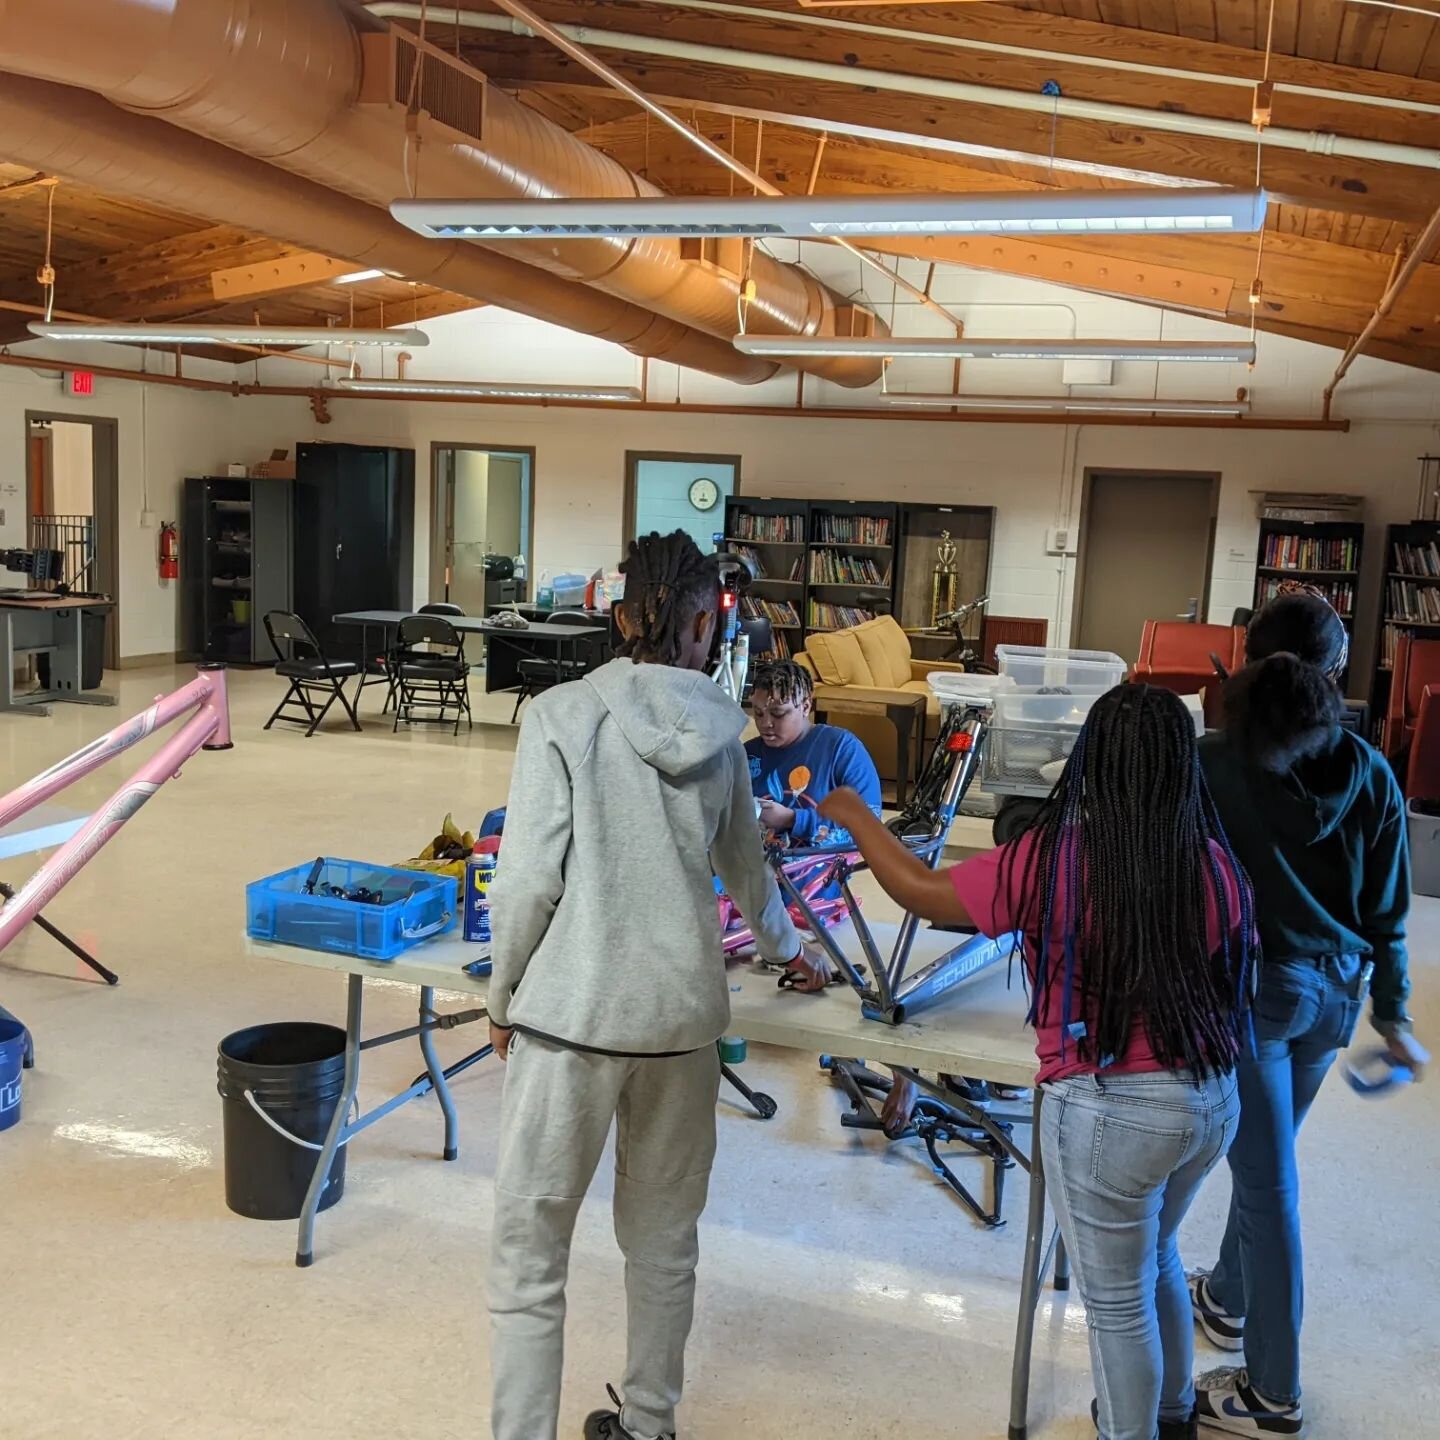 Our first ever build-a-bike class has been going strong 💪🏾 and now we need YOUR help. Rebuilding bikes can be a very involved process and we'd love to get some extra hands in helping the youth finish out their builds. We are looking for anyone with